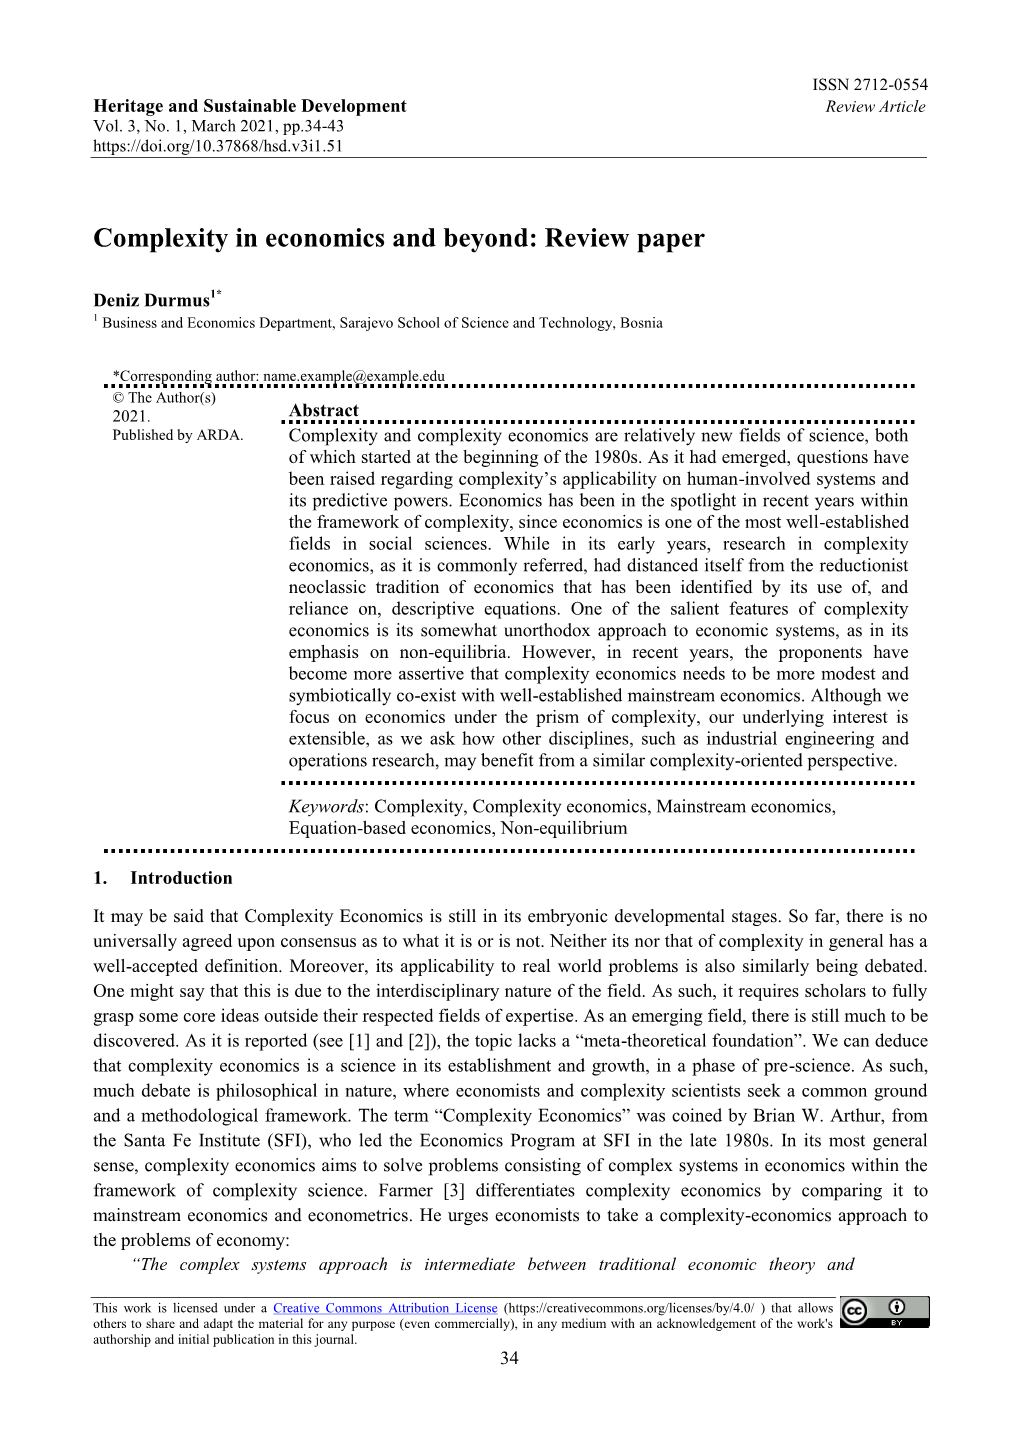 Complexity in Economics and Beyond: Review Paper